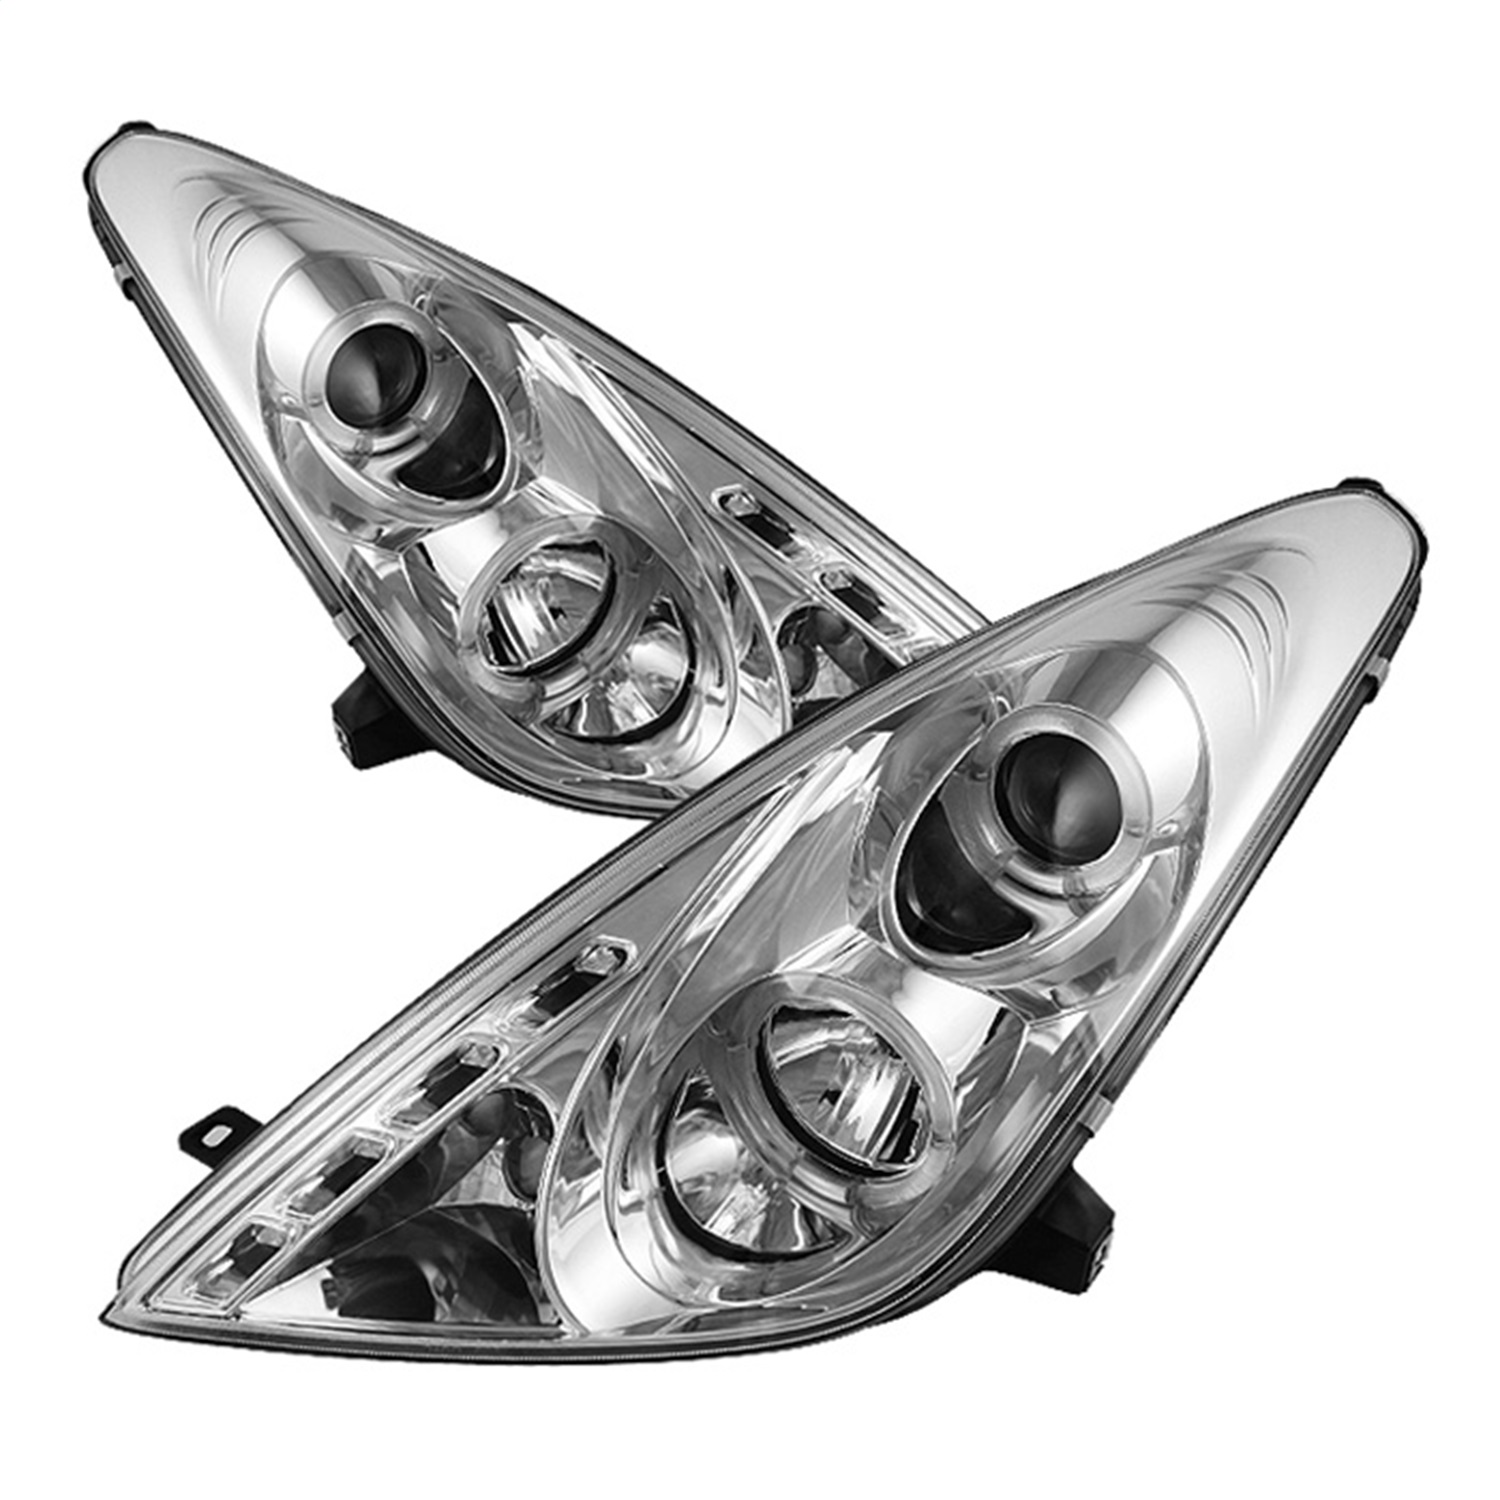 Spyder Auto 5011848 Halo LED Projector Headlights Fits 00-05 Celica